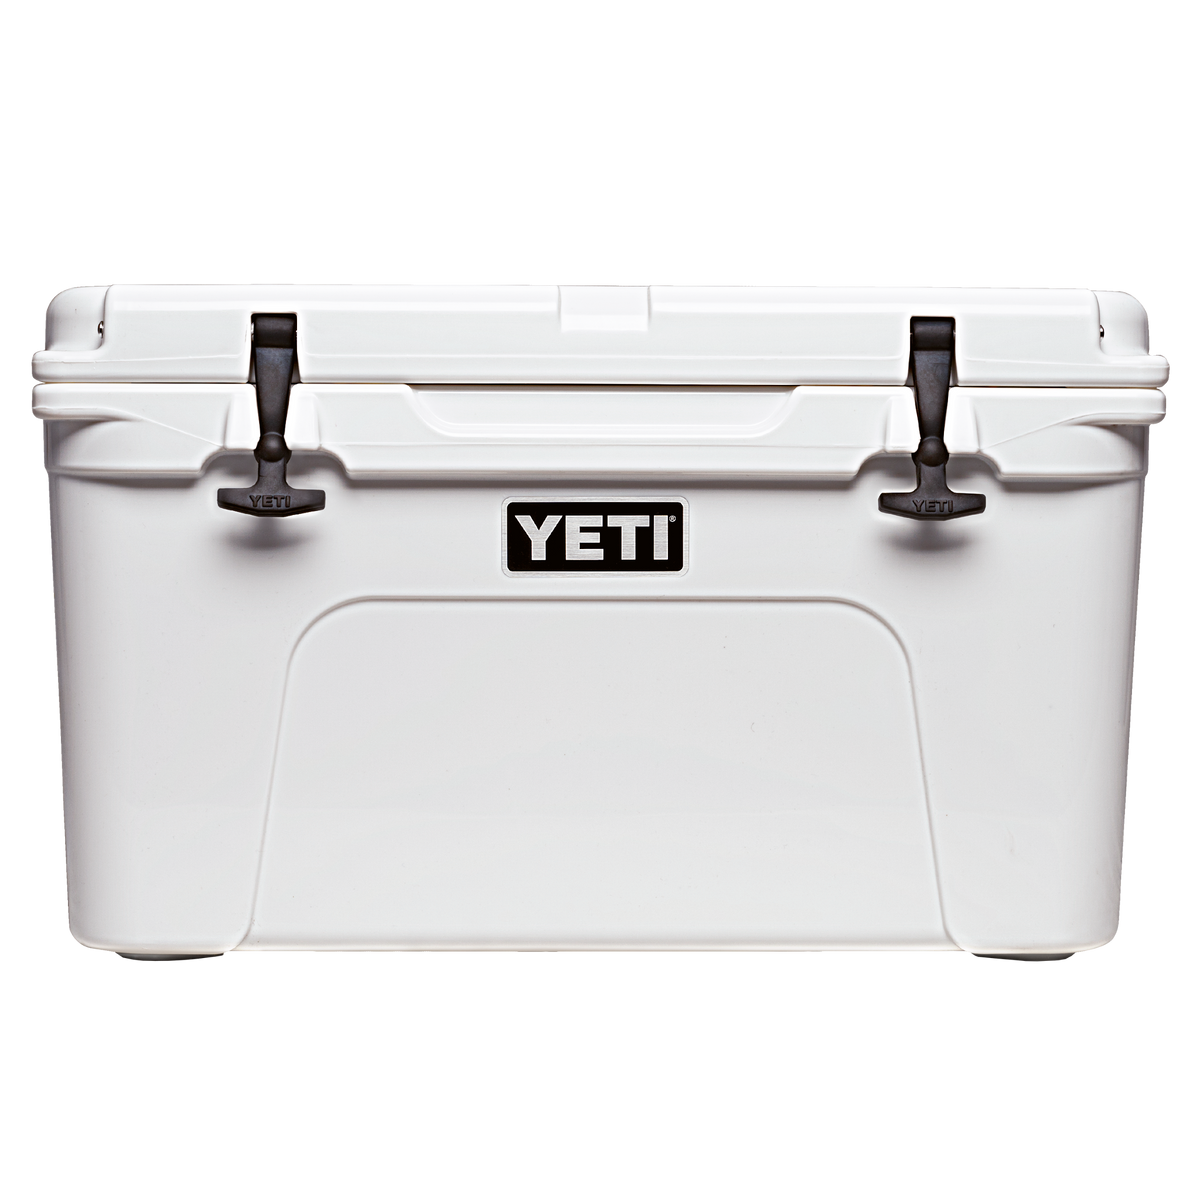 YETI Tundra 65 Insulated Chest Cooler, Harvest Red at